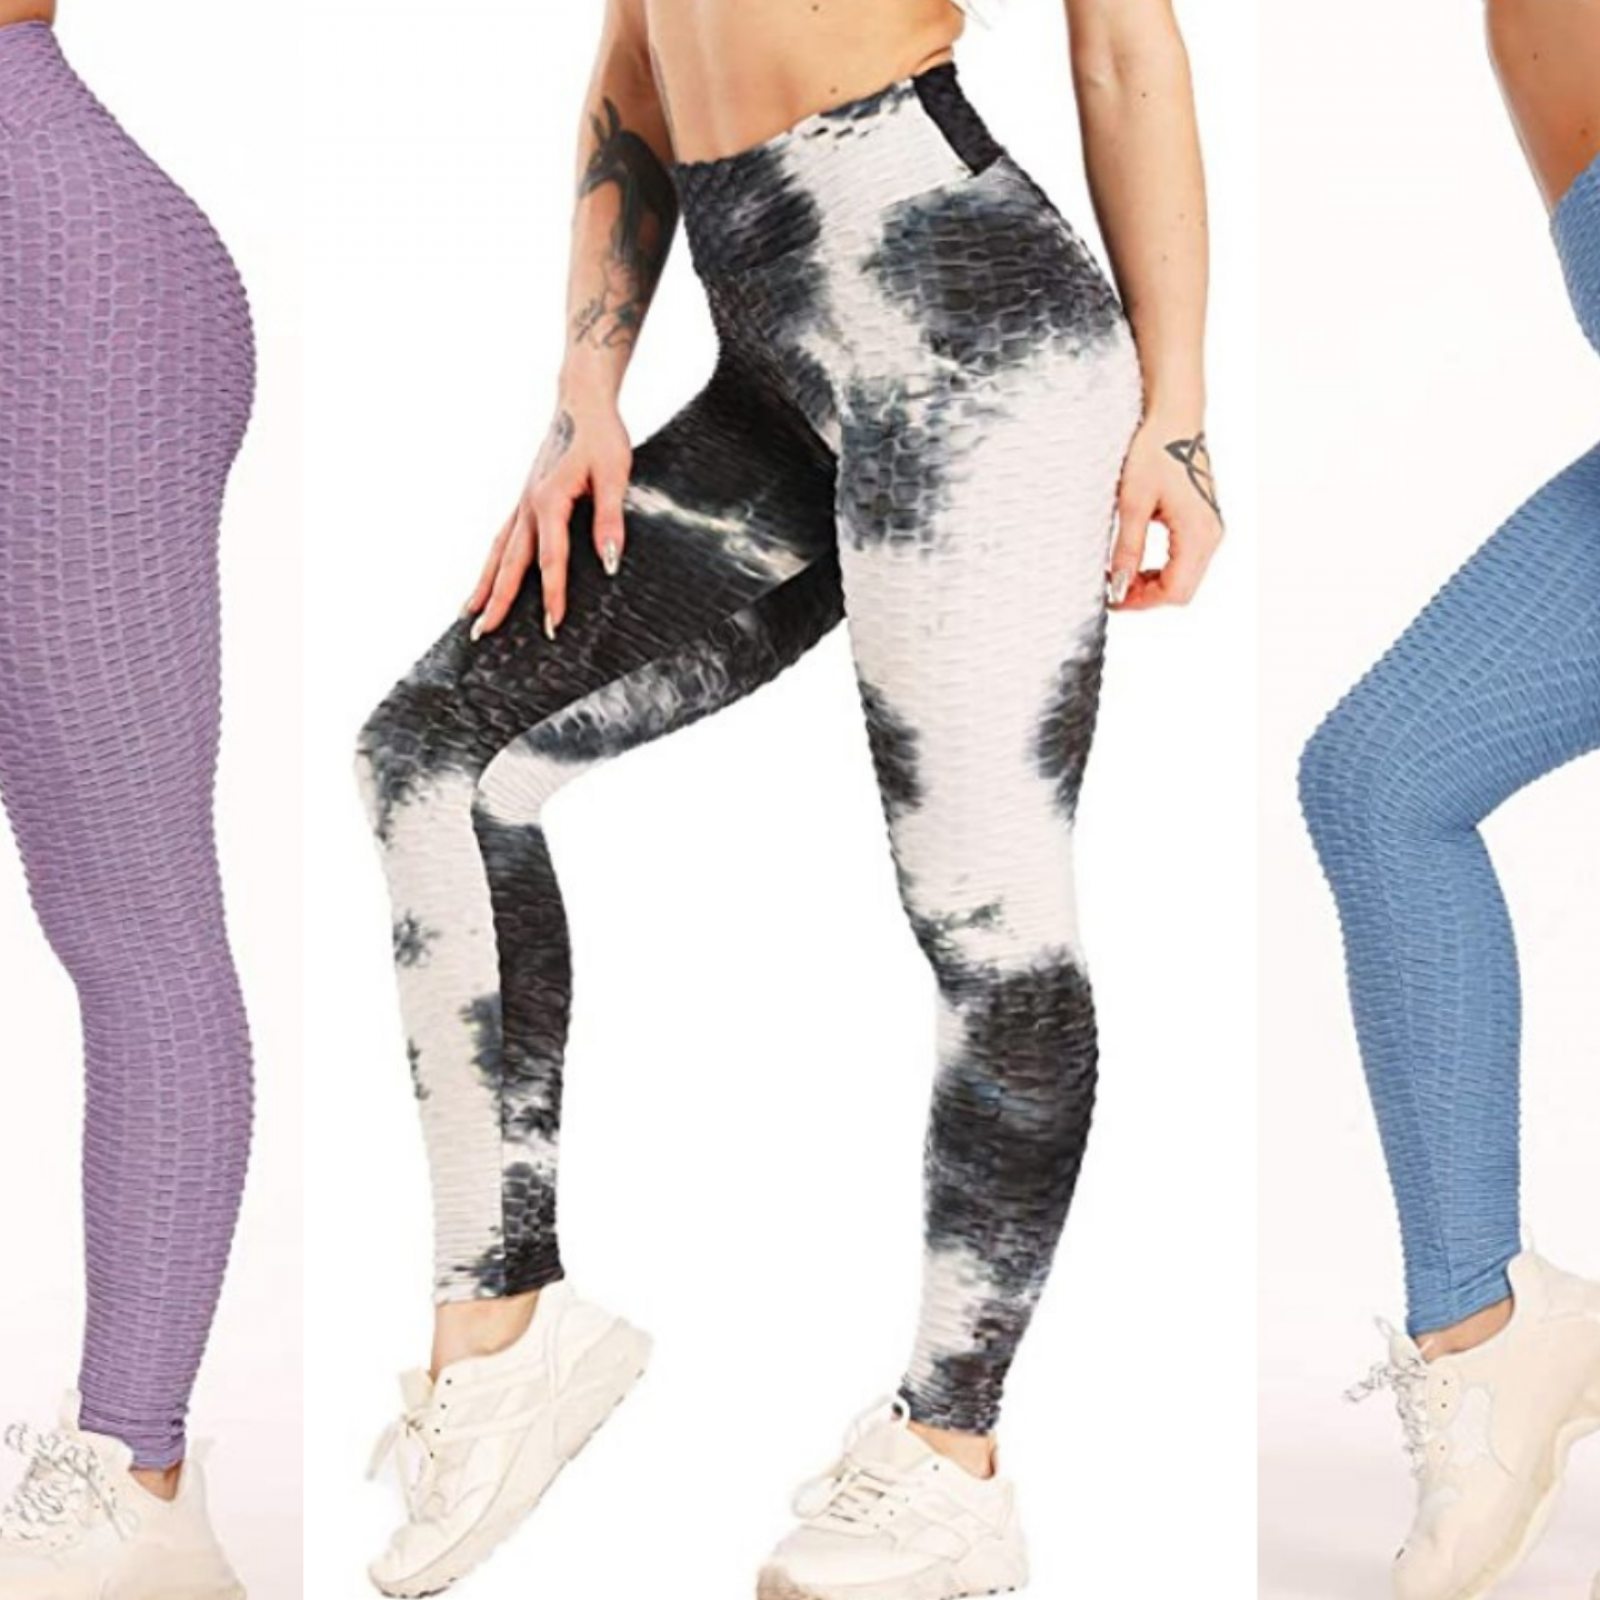 Are you tired of leg days at the gym? Give your booty an instant